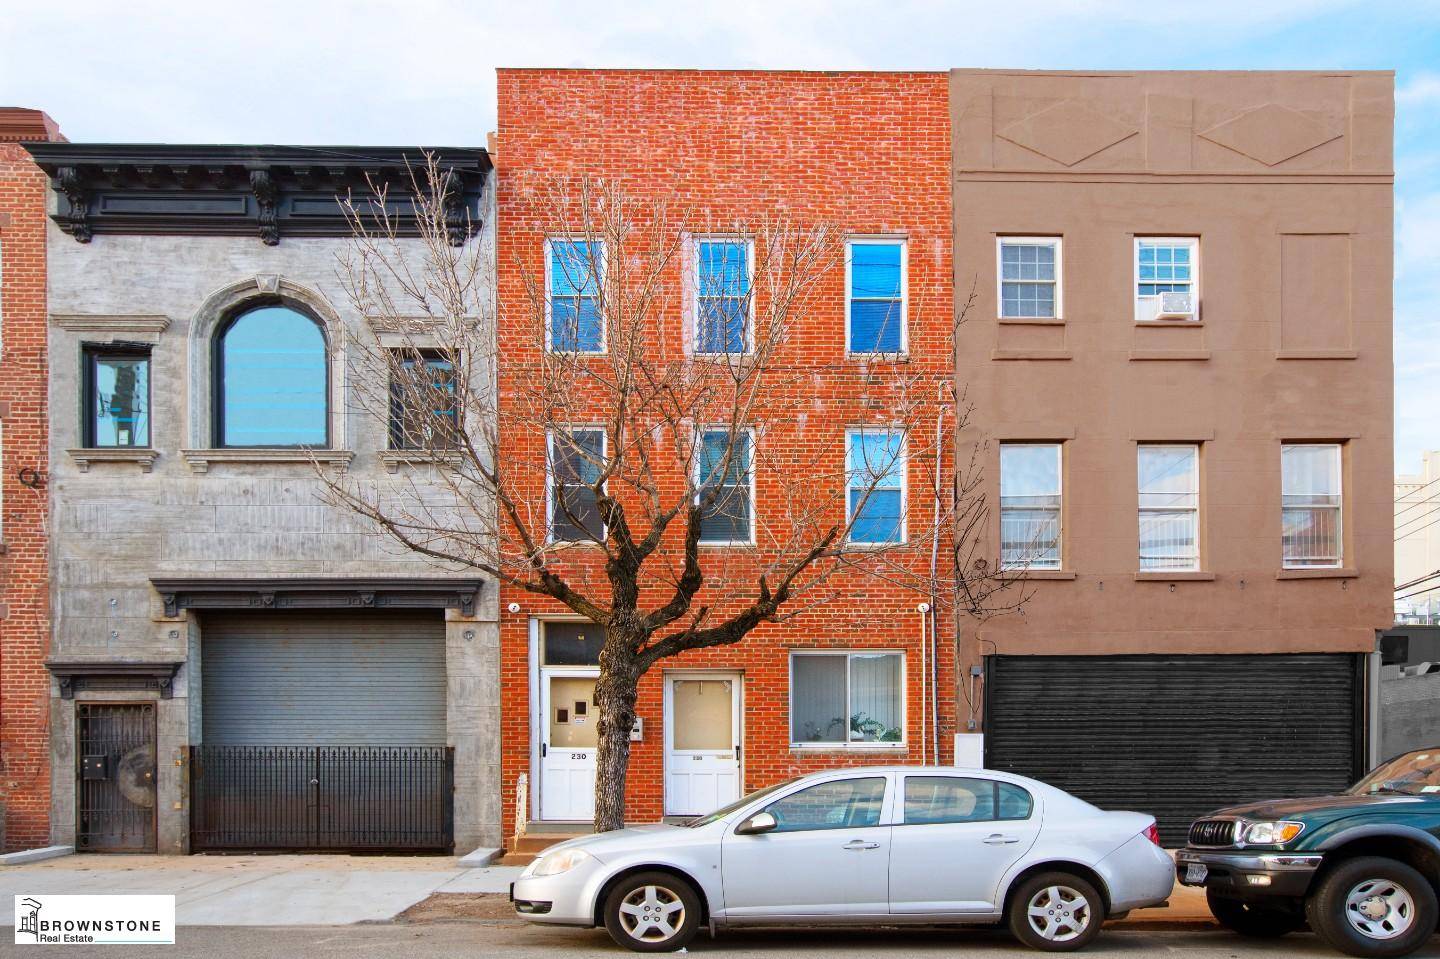 In Red Hook, savvy and creative buyers continue to purchase and breathtakingly transform properties.